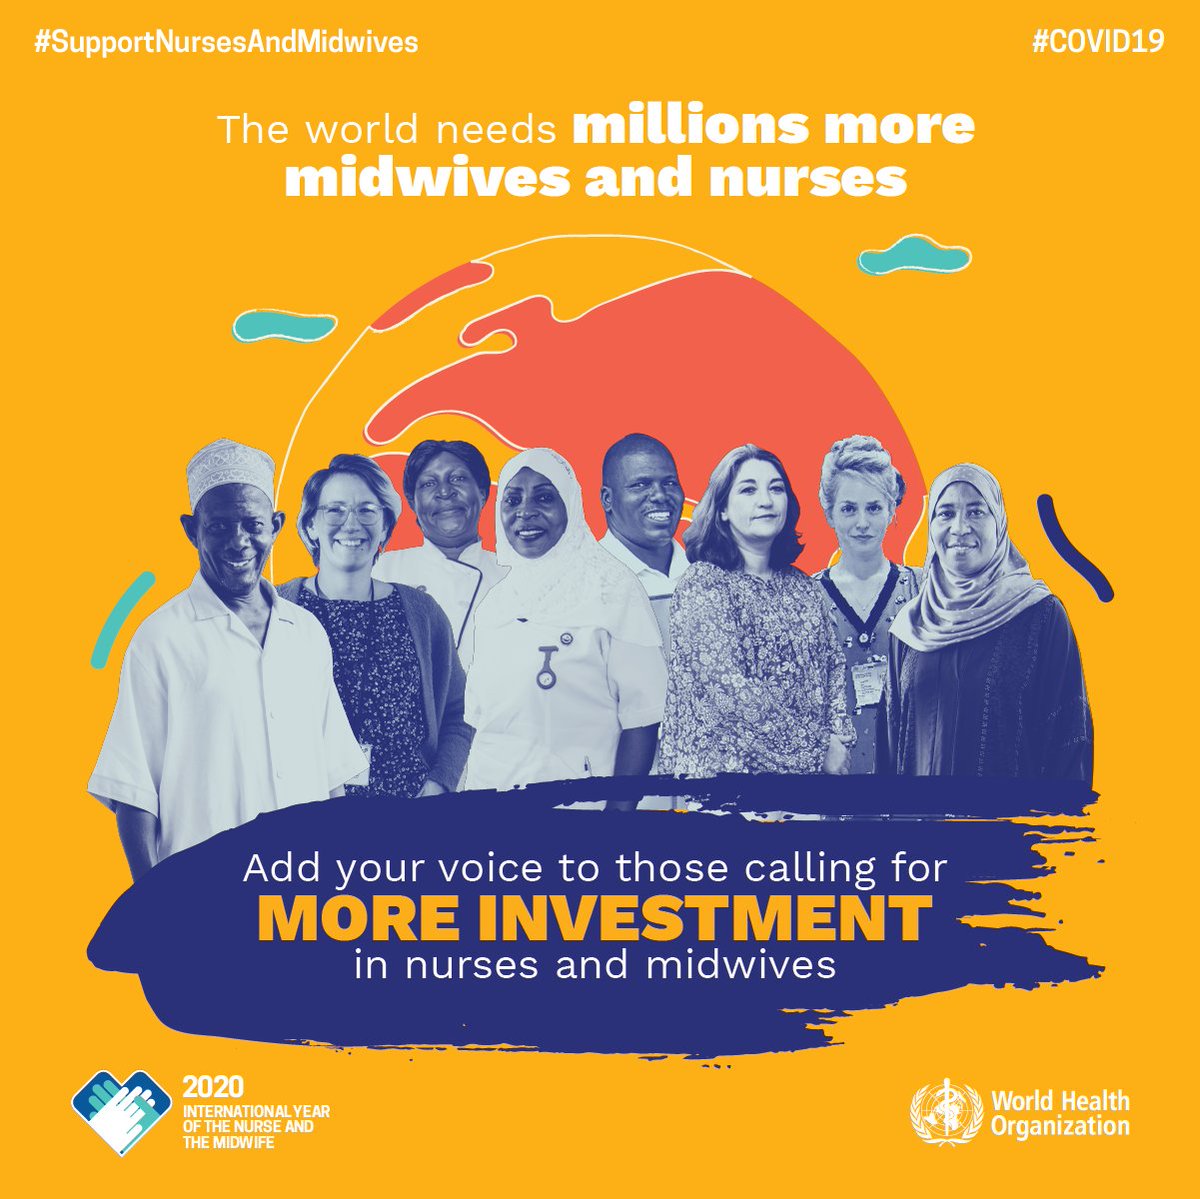 The  #COVID19 pandemic underscores the urgent need to strengthen the global health workforce, of which more than 50% are nurses .On this  #WorldHealthDay  , WHO &  @ICNurses  @NursingNow2020 are launching the 1st ever State of the World’s Nursing Report:  http://bit.ly/NursingReport2020